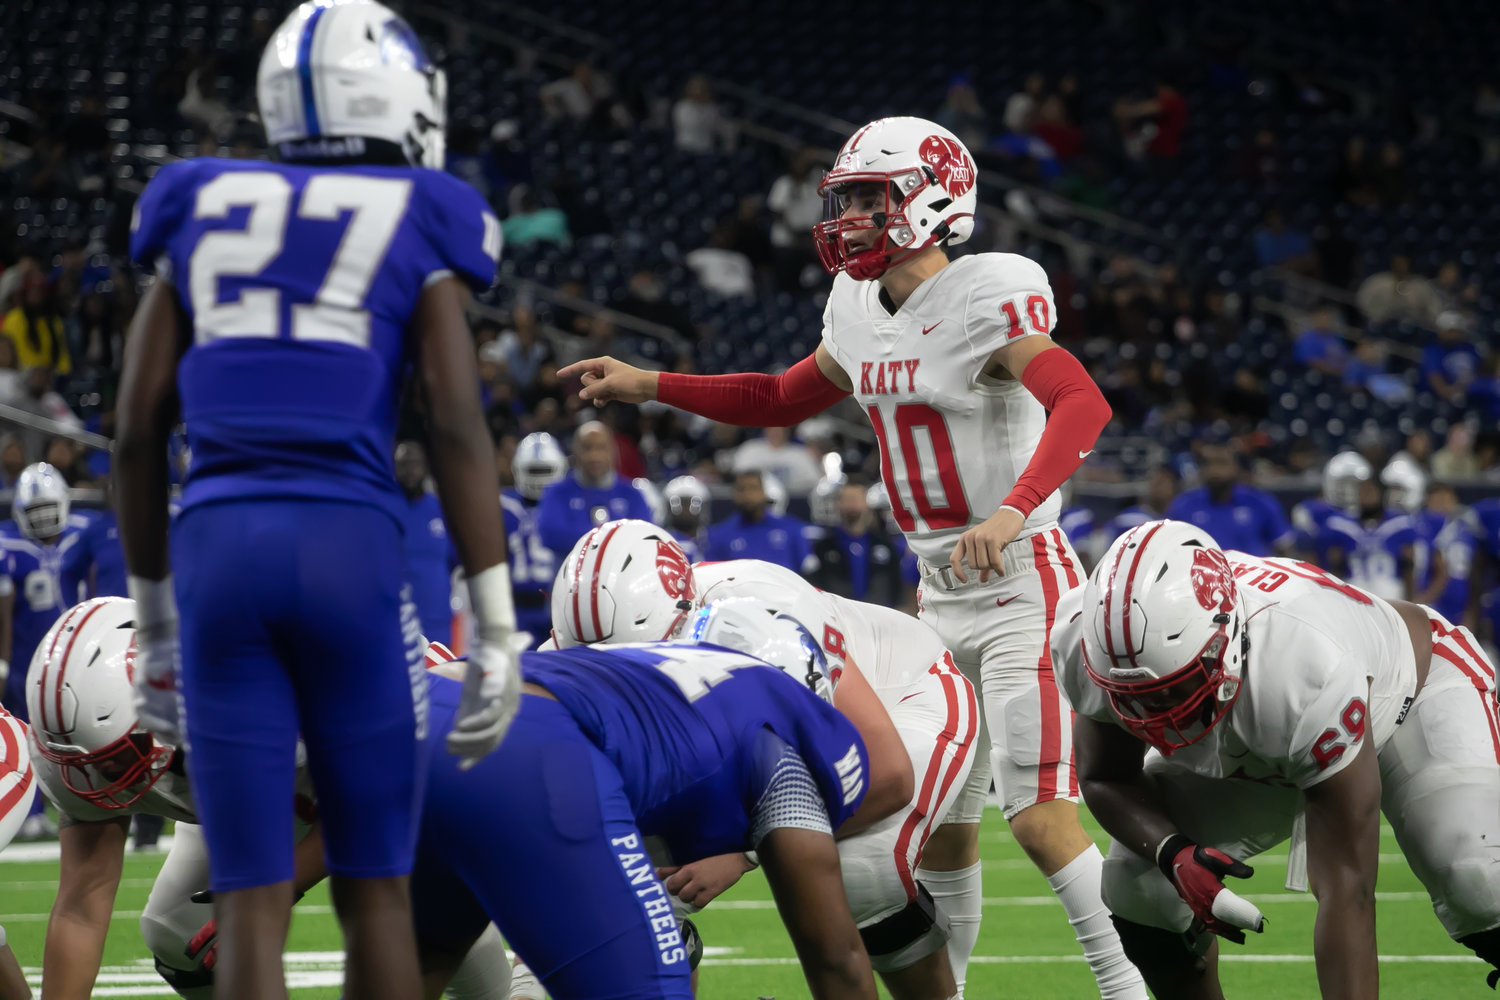 Caleb Koger lines the Katy offense up during Friday's Class 6A-Division II Region III Final between Katy and C.E. King at NRG Stadium.